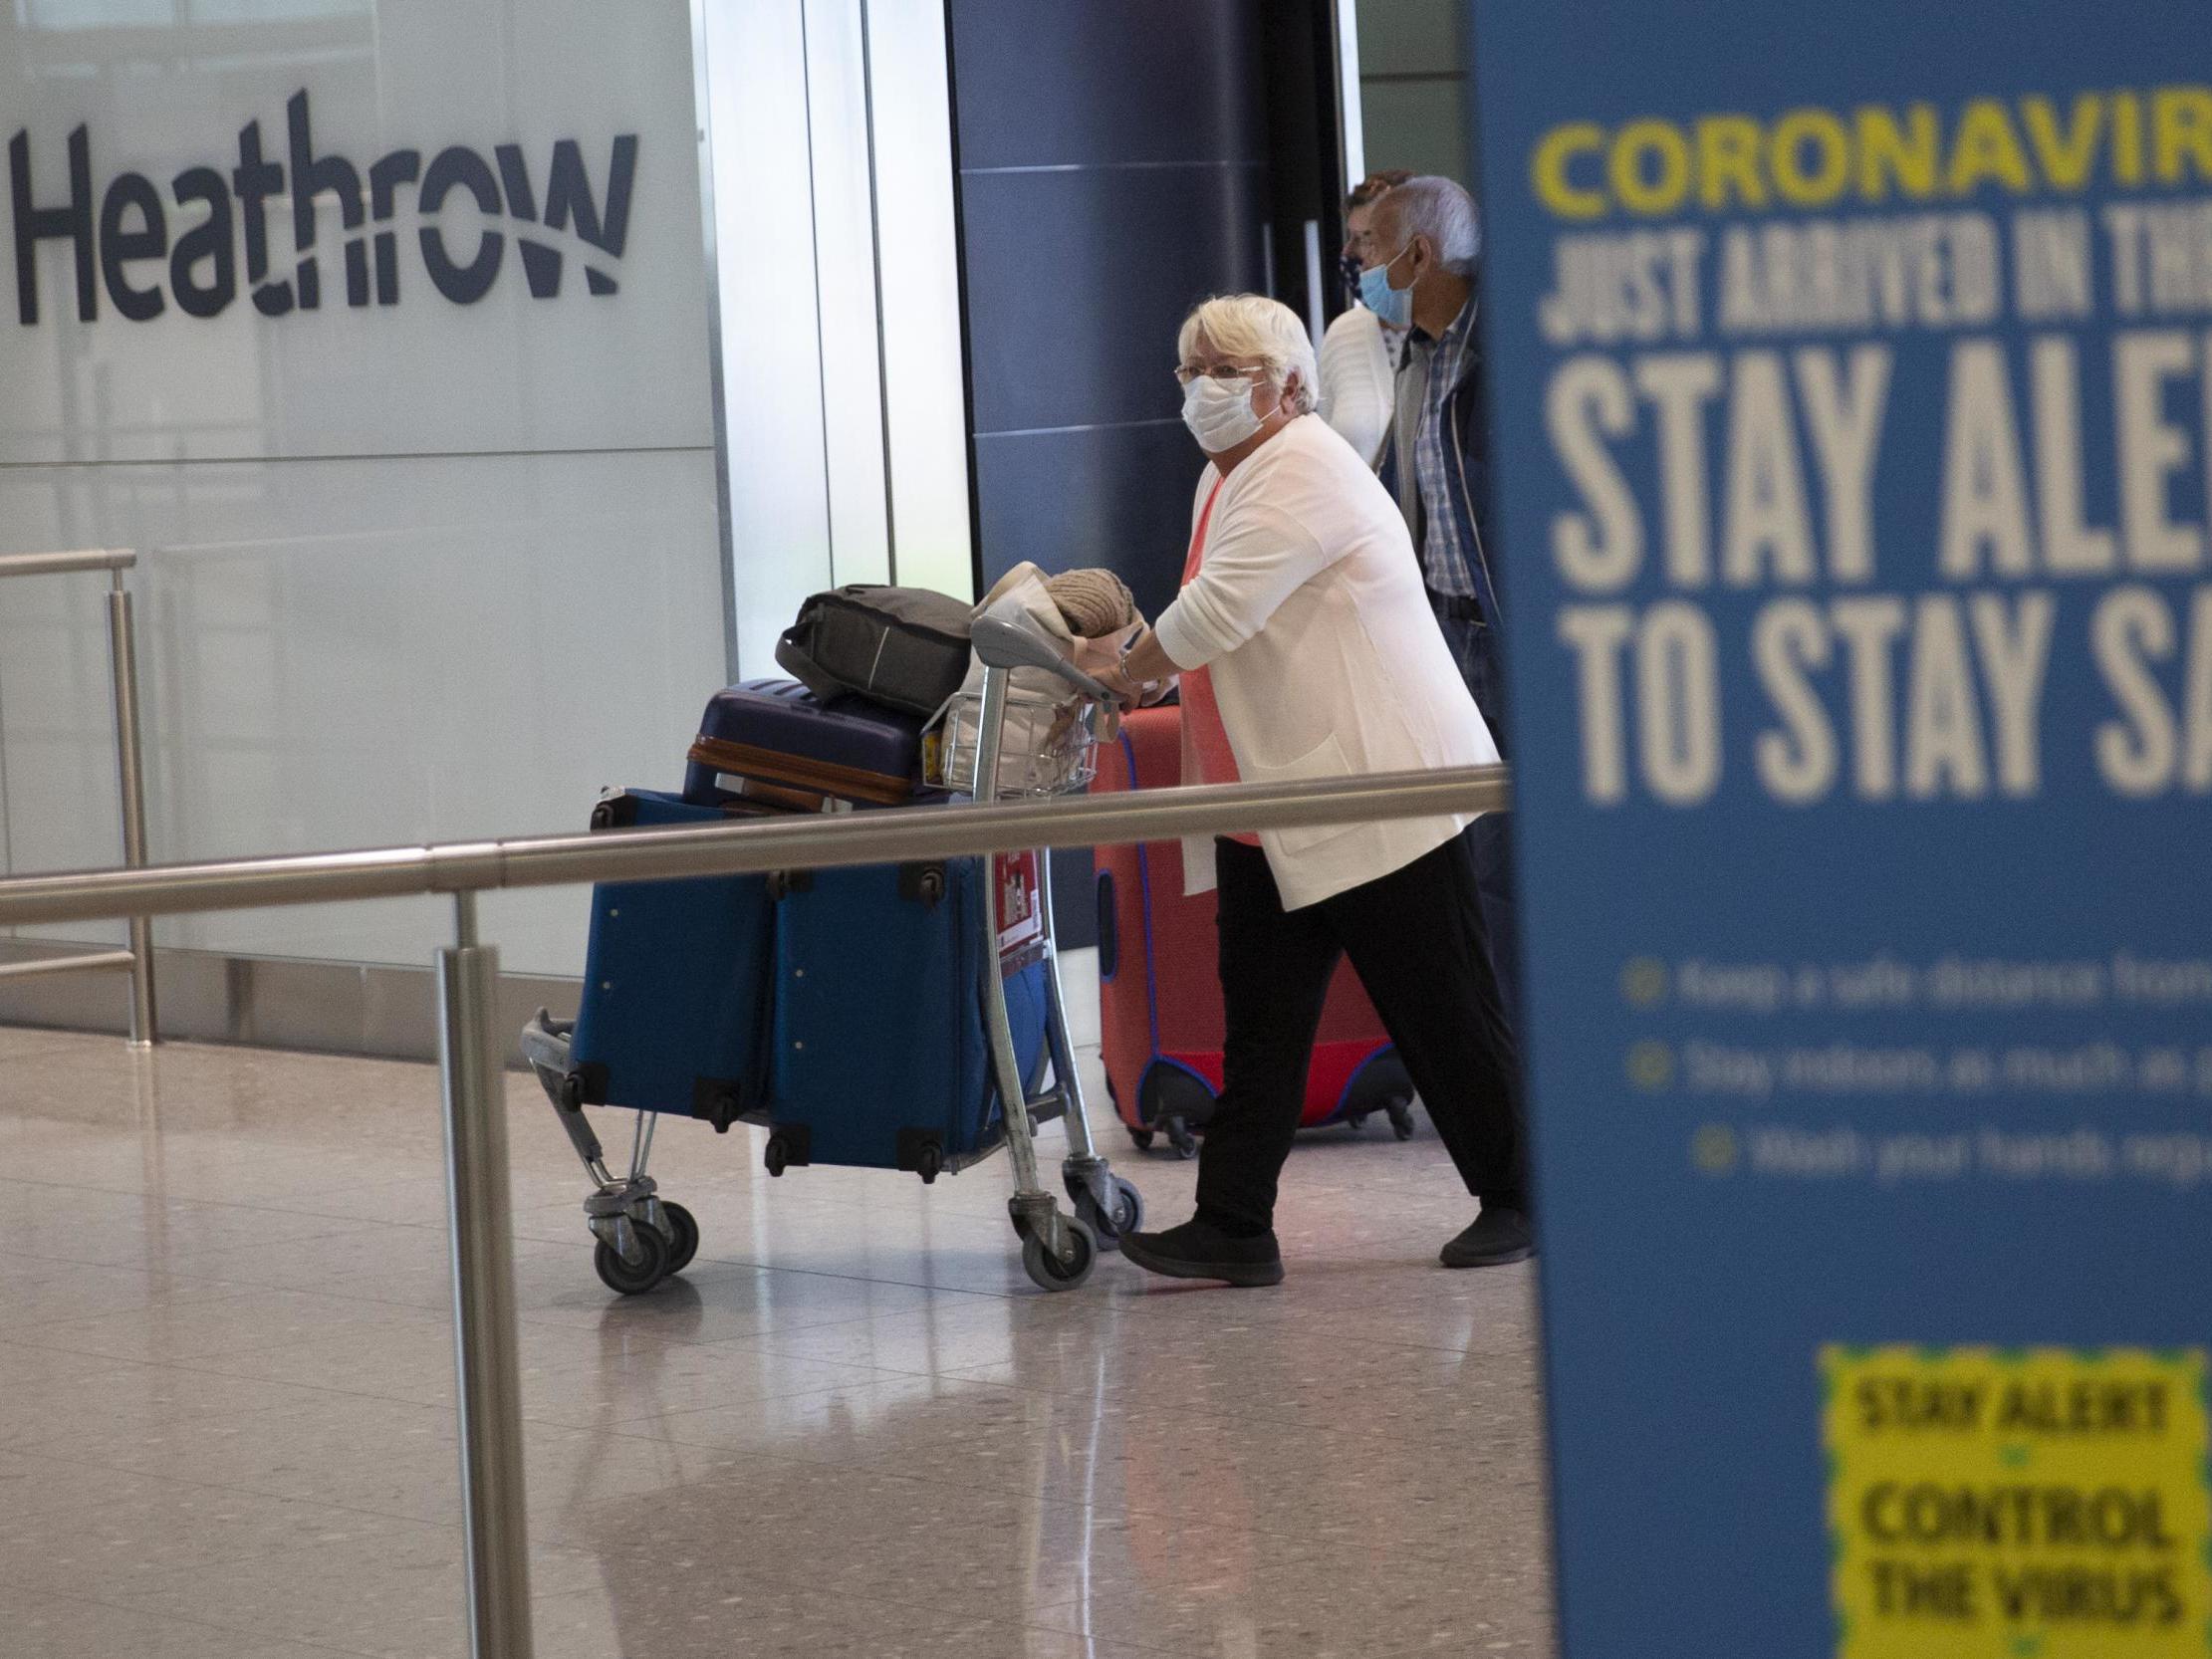 Passengers arrive at Heathrow on the first day of the 14-day quarantine policy